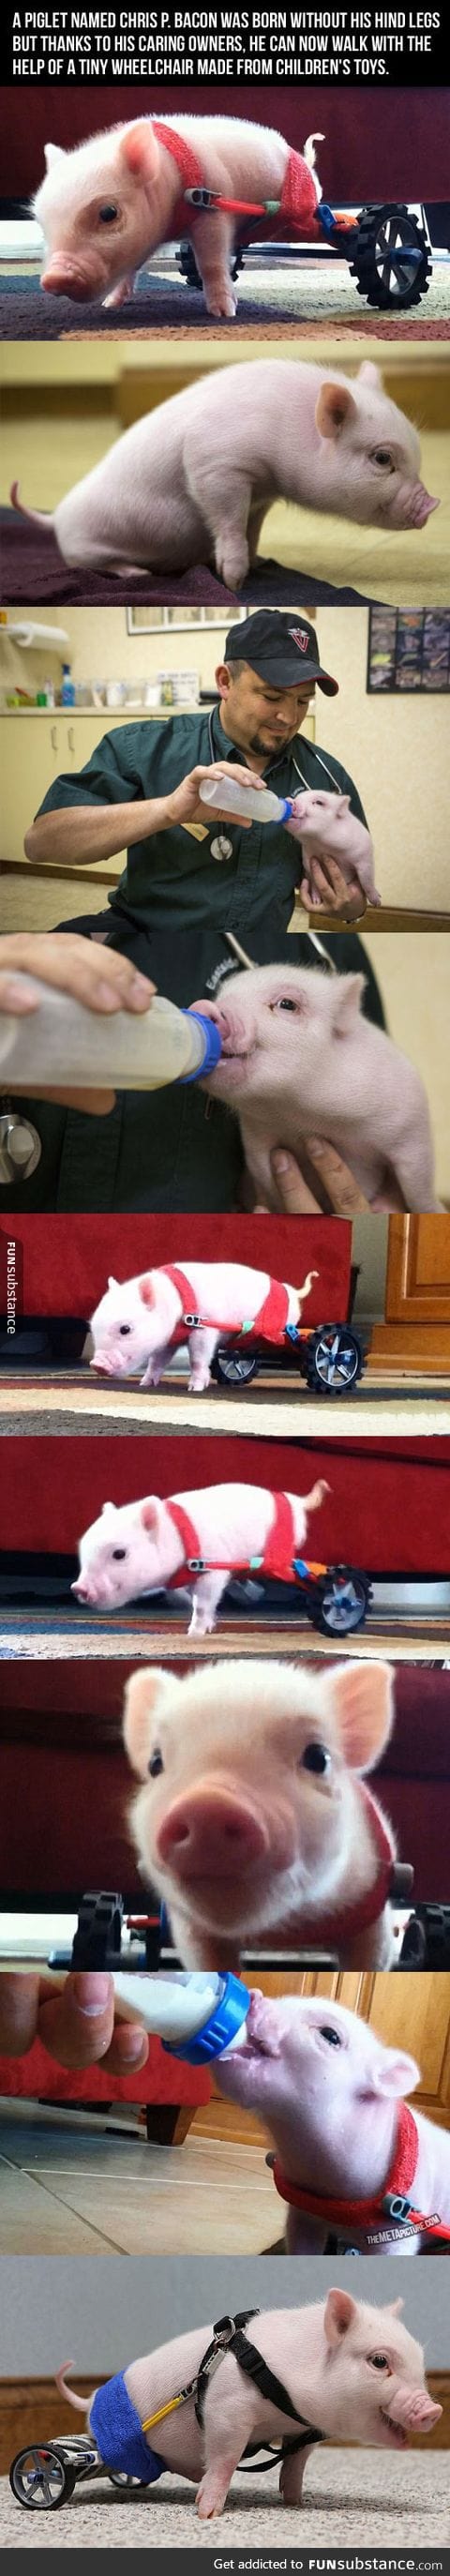 The Piglet Who Couldn't Walk